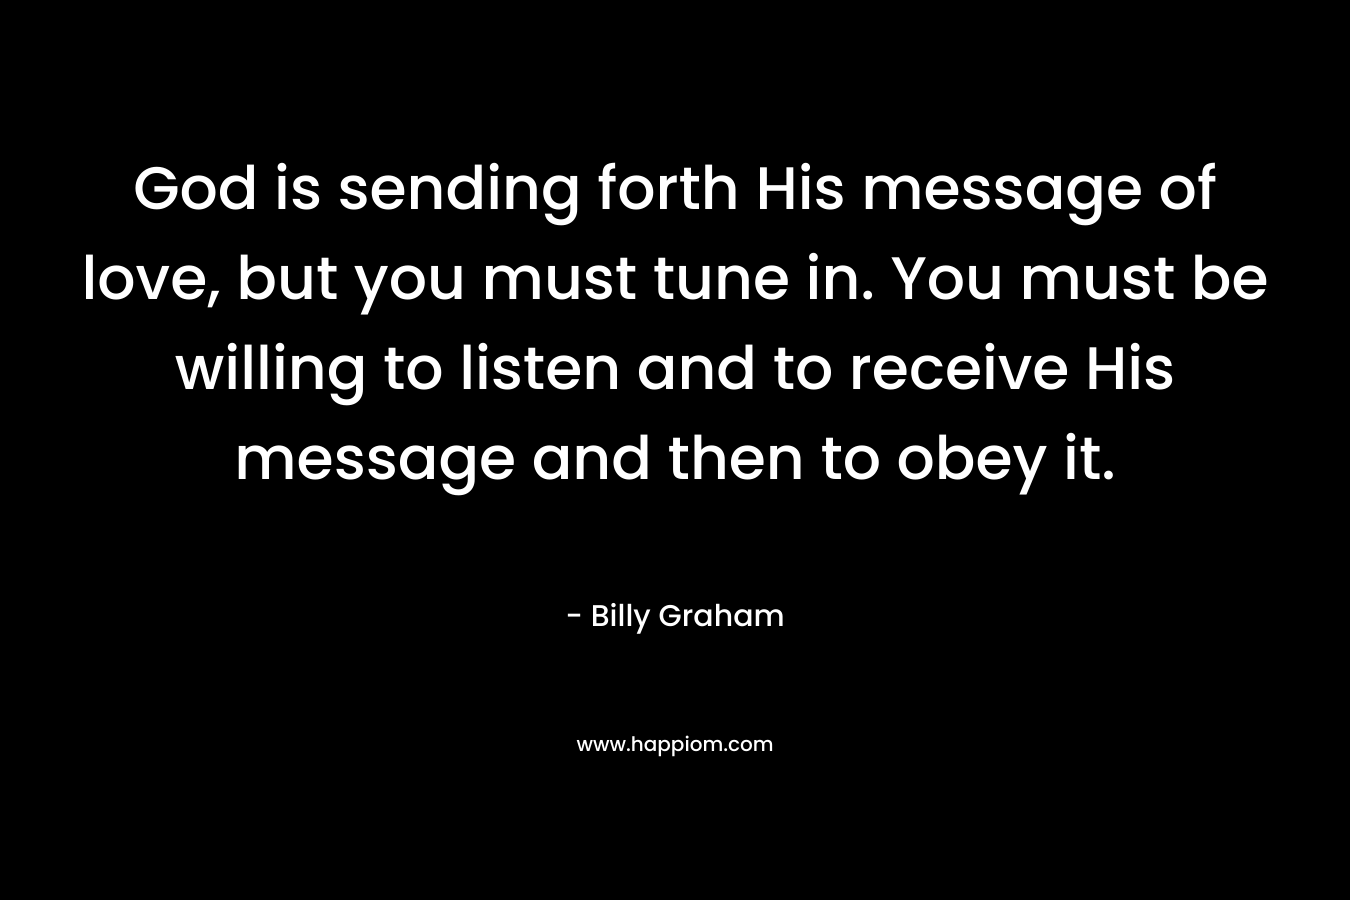 God is sending forth His message of love, but you must tune in. You must be willing to listen and to receive His message and then to obey it.